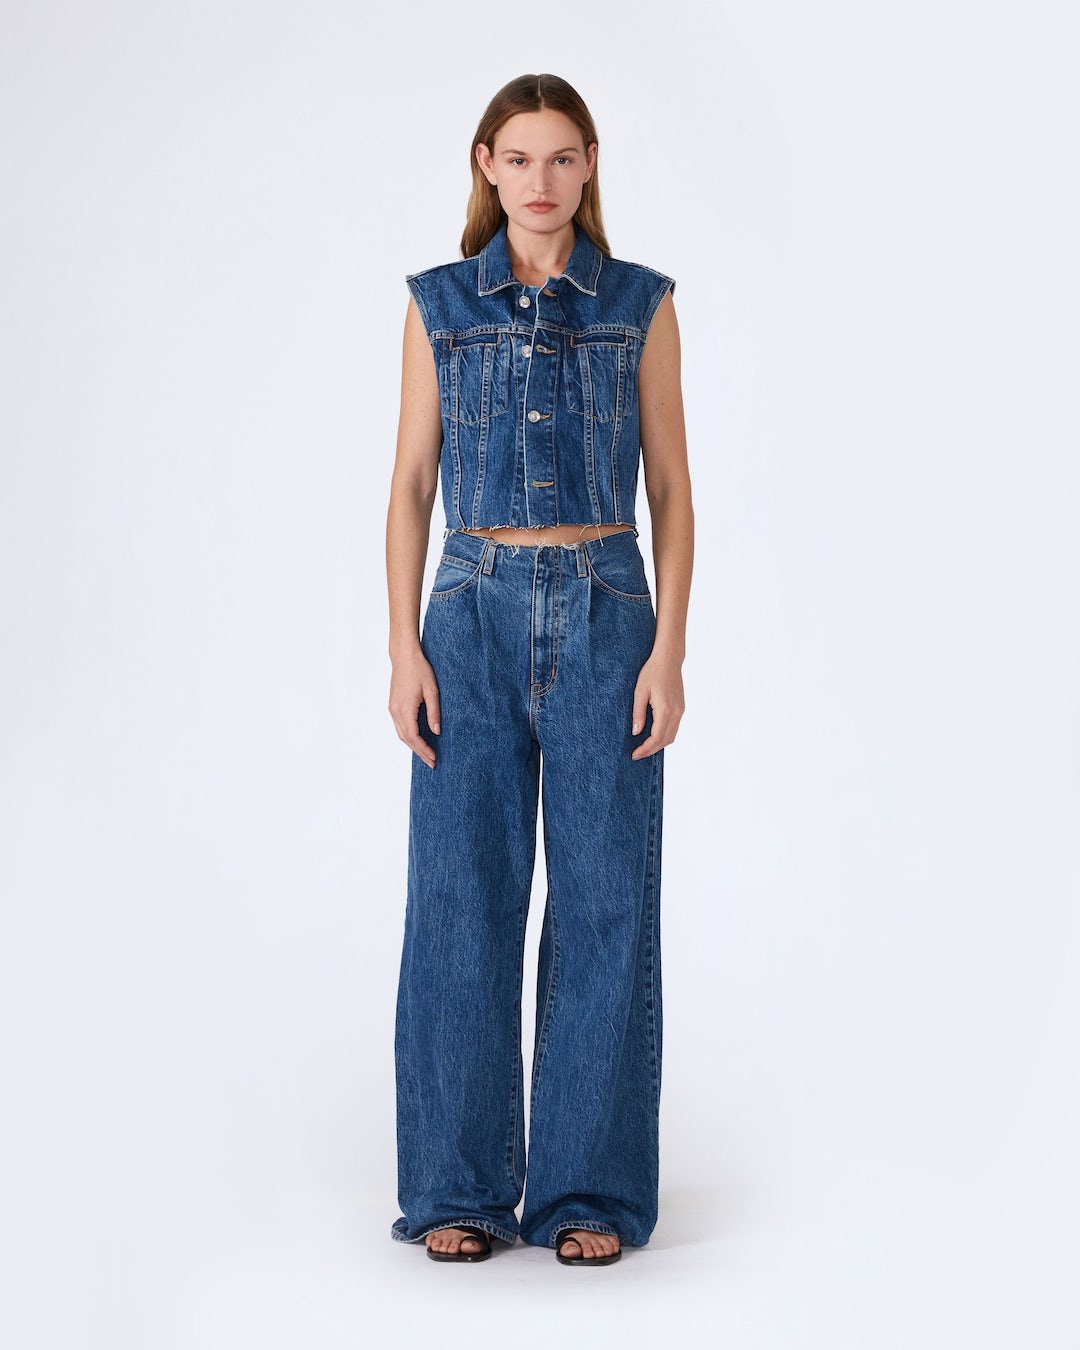 Slvrlake Taylor Wide Pleat Jean in Sweet Memory available at TNT The New Trend Australia.